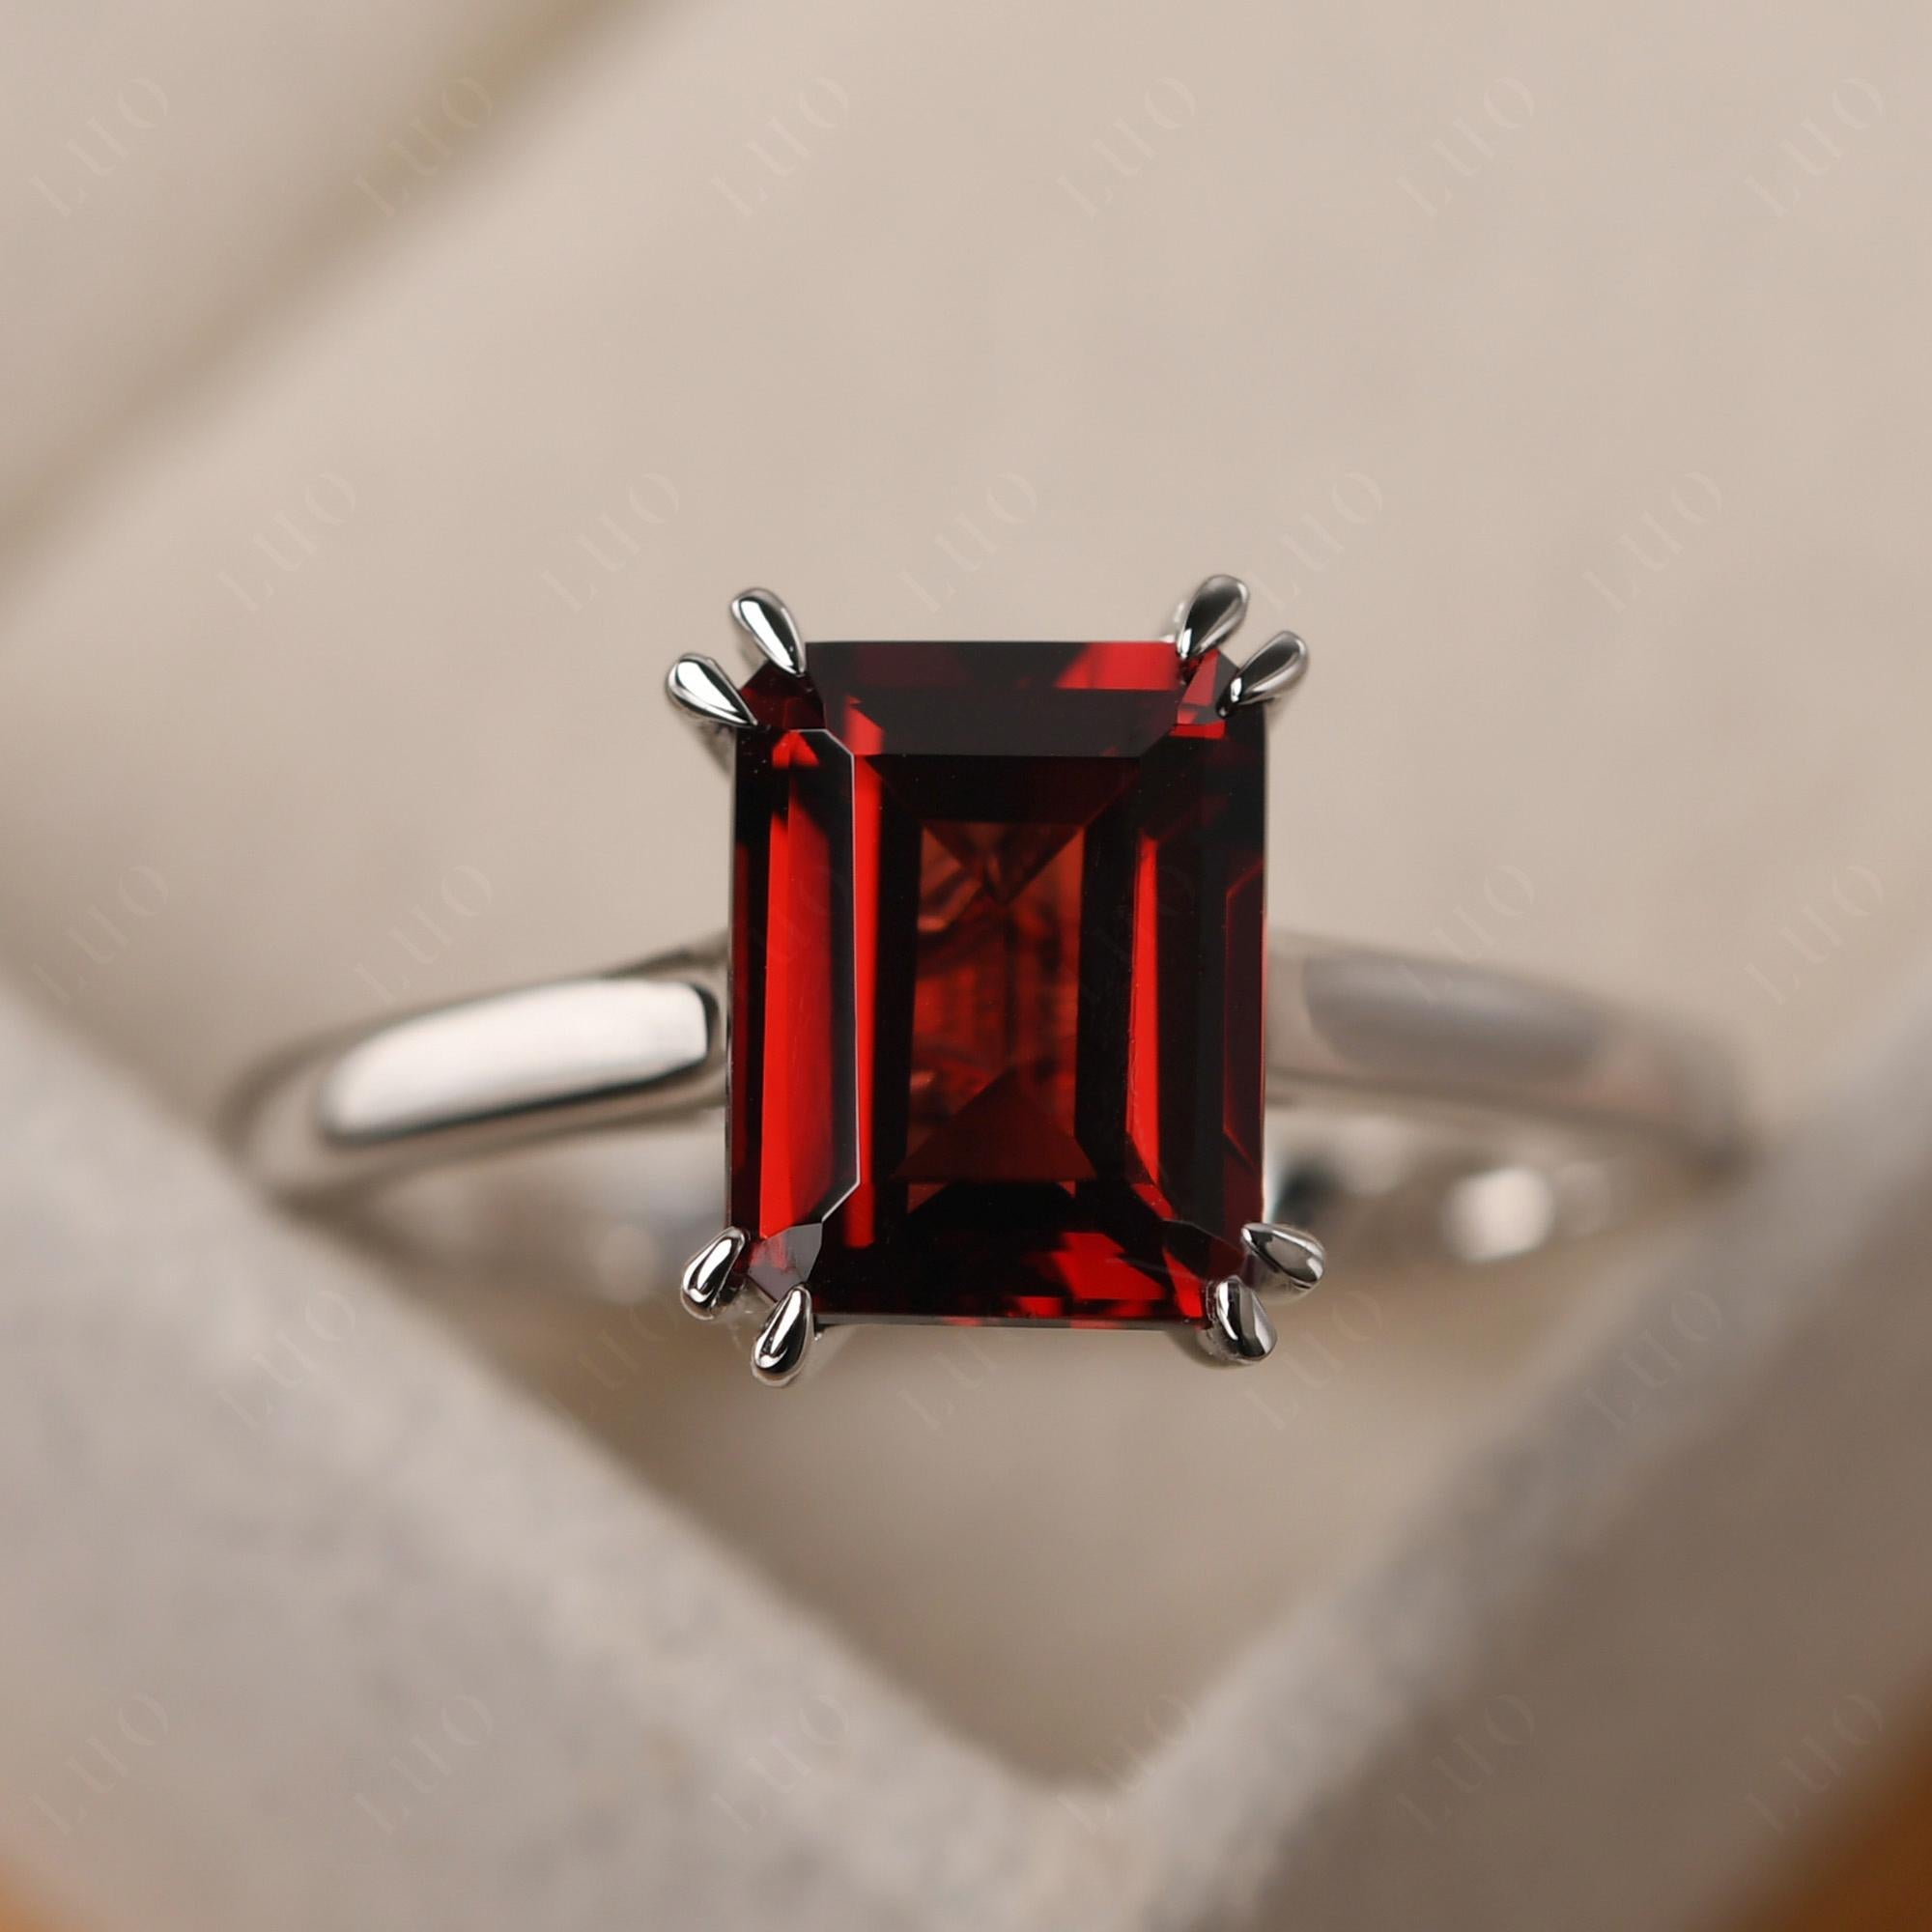 Emerald Cut Garnet Solitaire Wedding Ring - LUO Jewelry